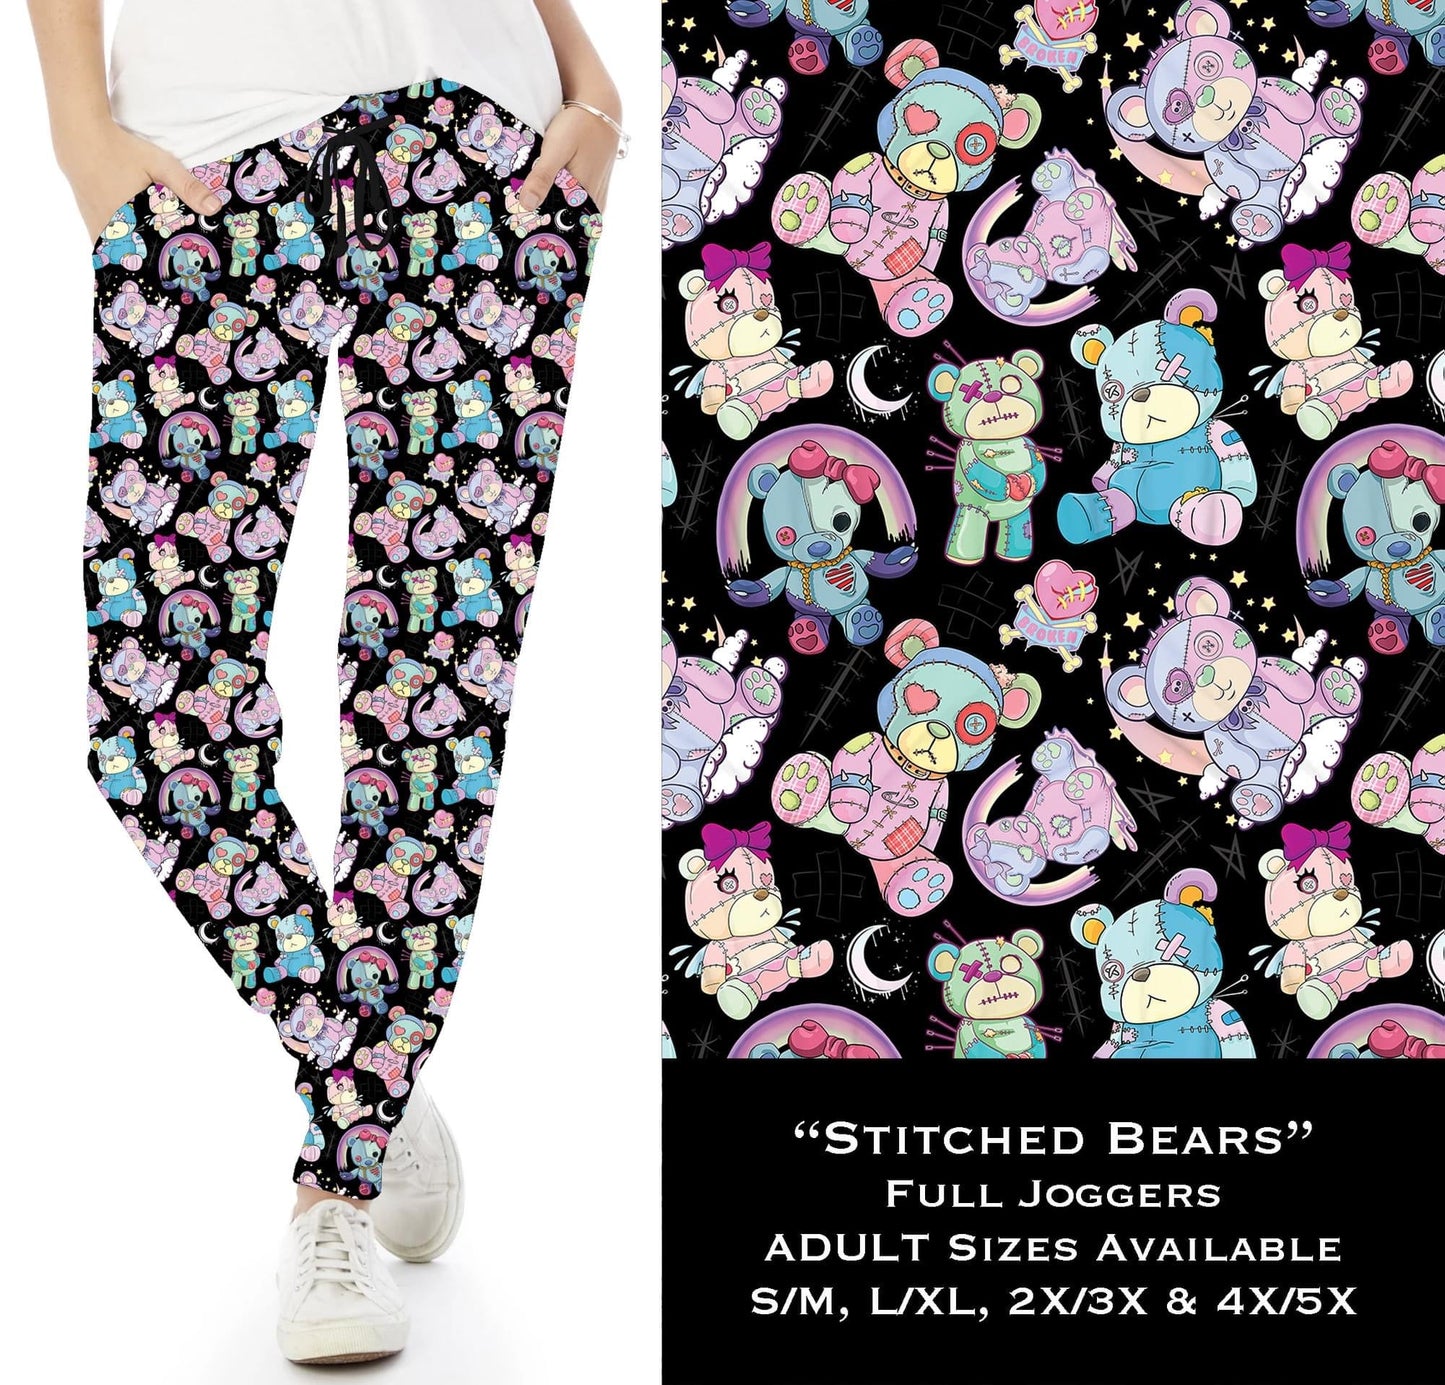 Stitched Bears - Full Joggers